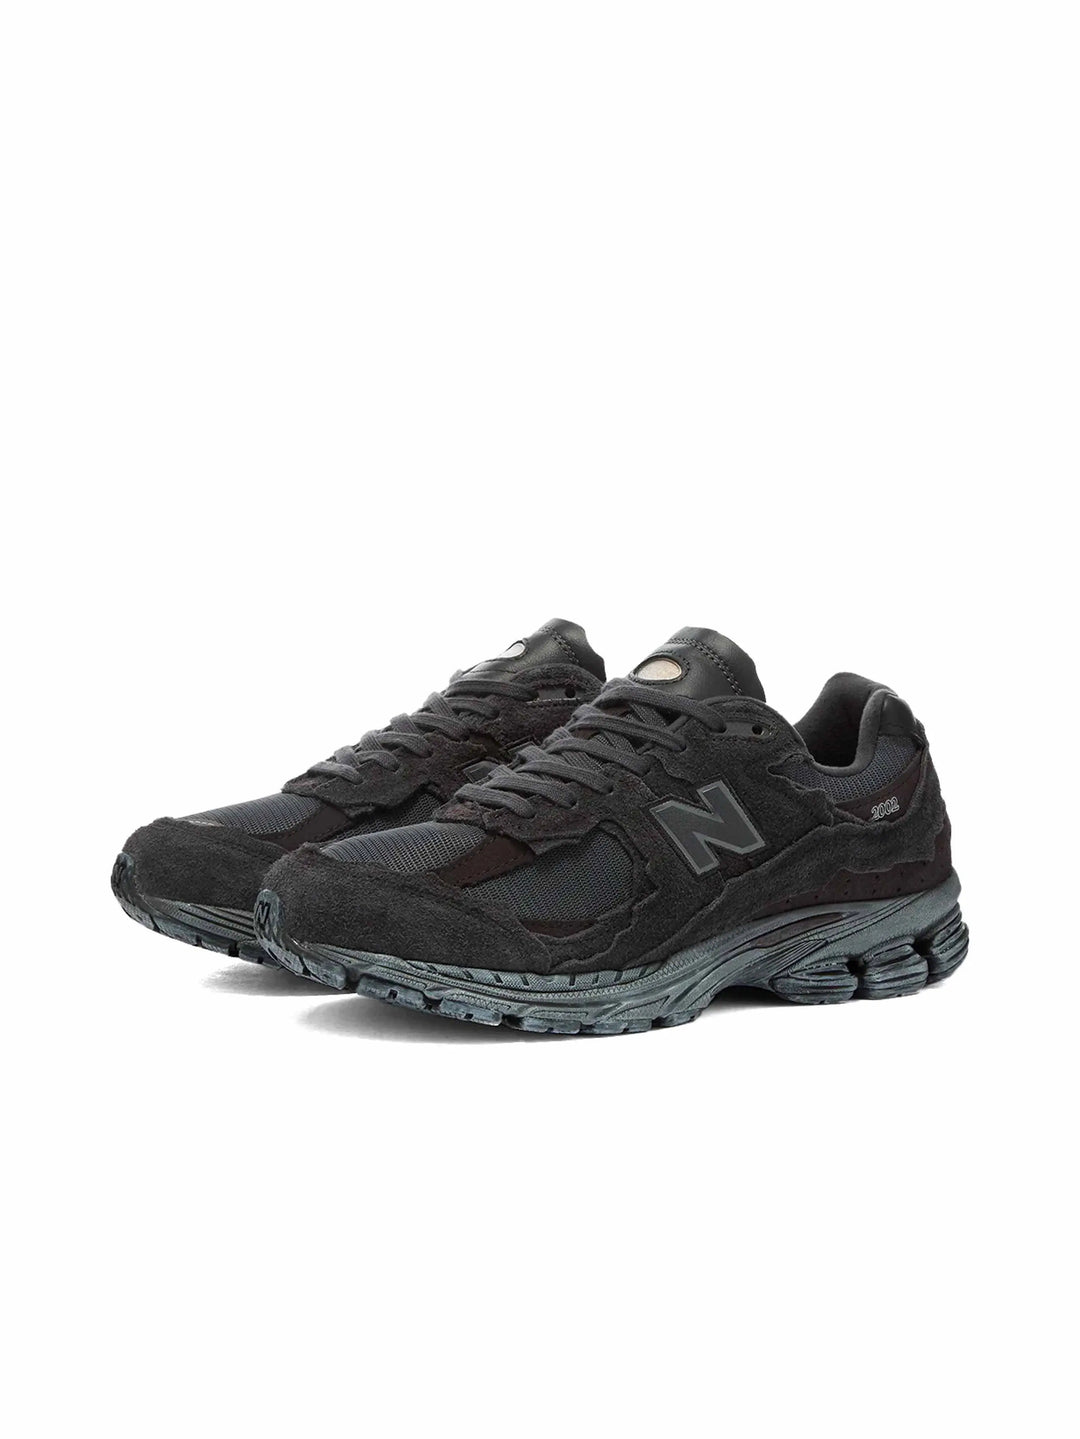 New Balance 2002R Protection Pack Phantom in Auckland, New Zealand - Shop name